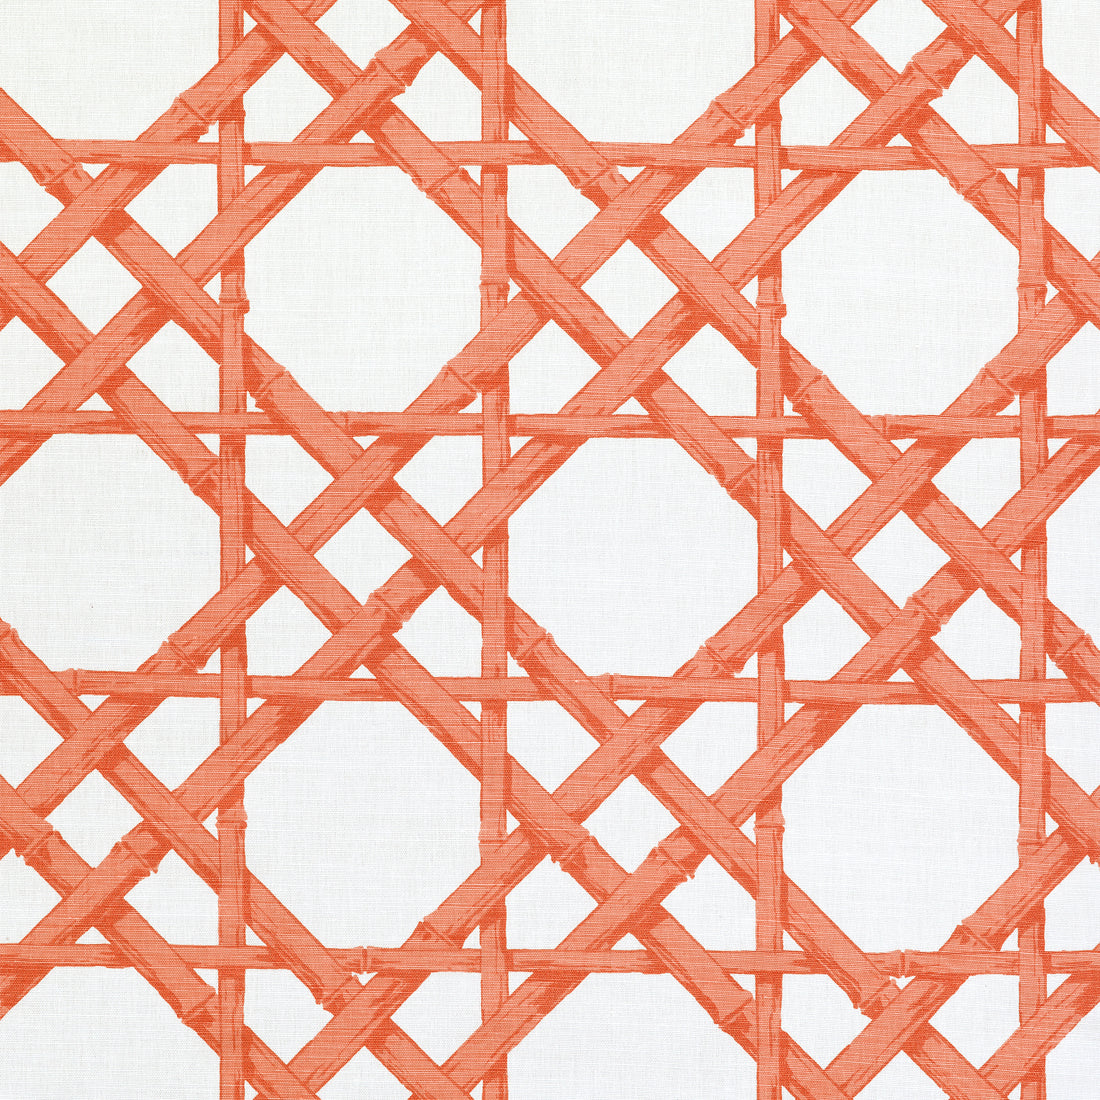 Cyrus Cane fabric in coral color - pattern number F913142 - by Thibaut in the Summer House collection